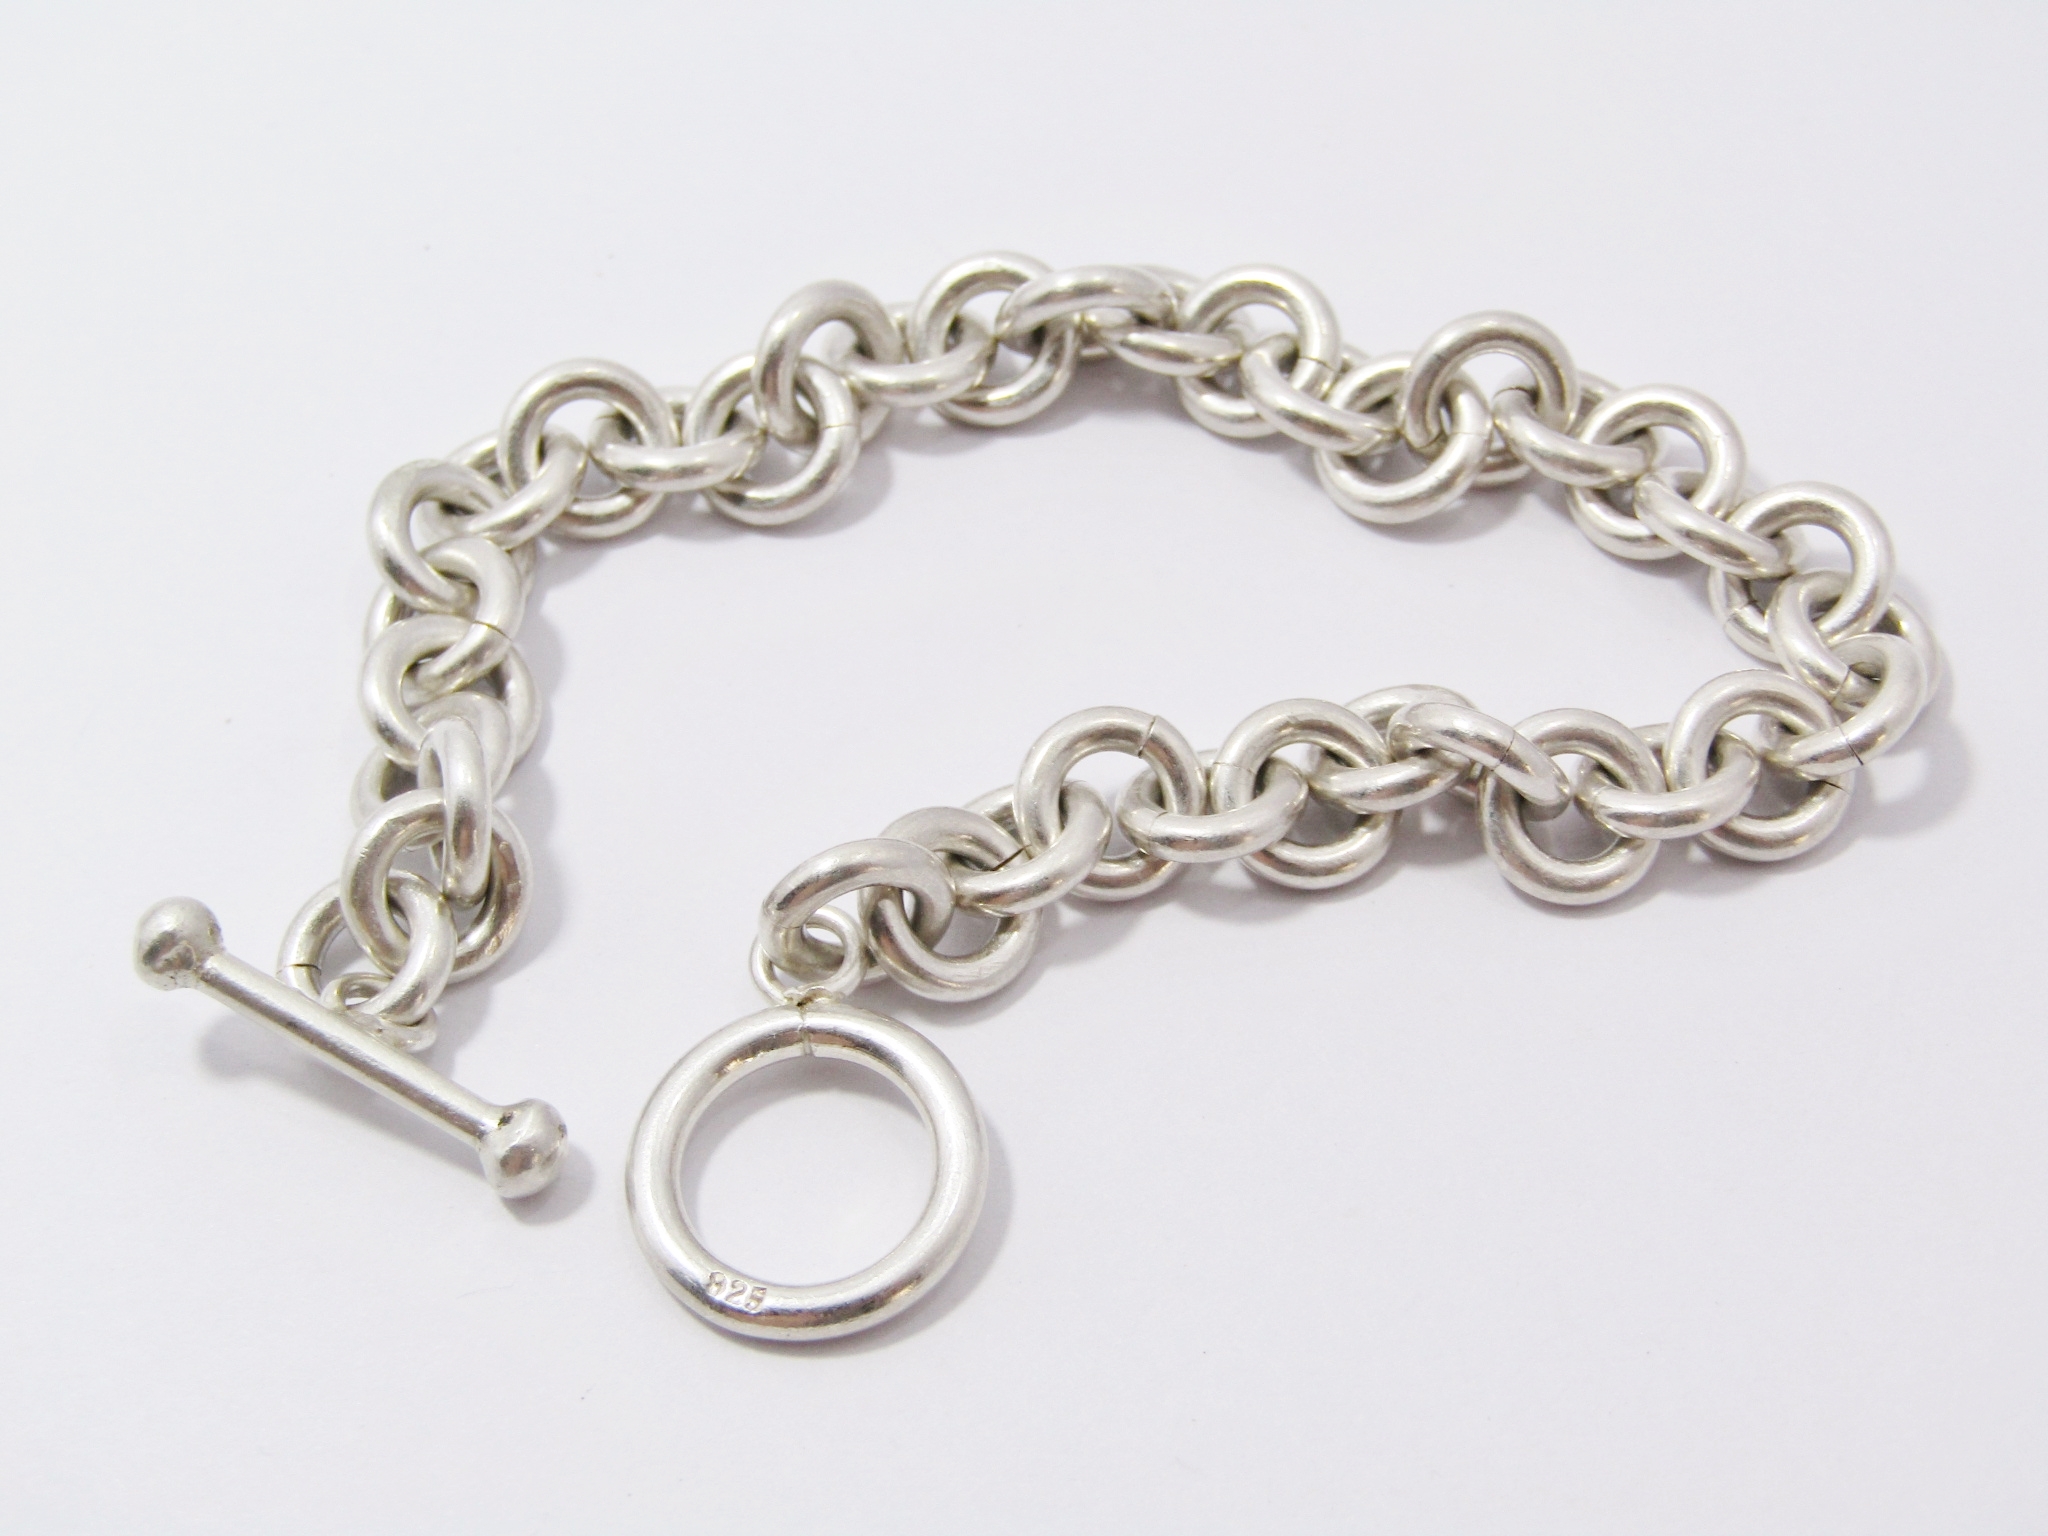 A Gorgeous Chunky Bracelet with a Fob Clasp in Sterling Silver.